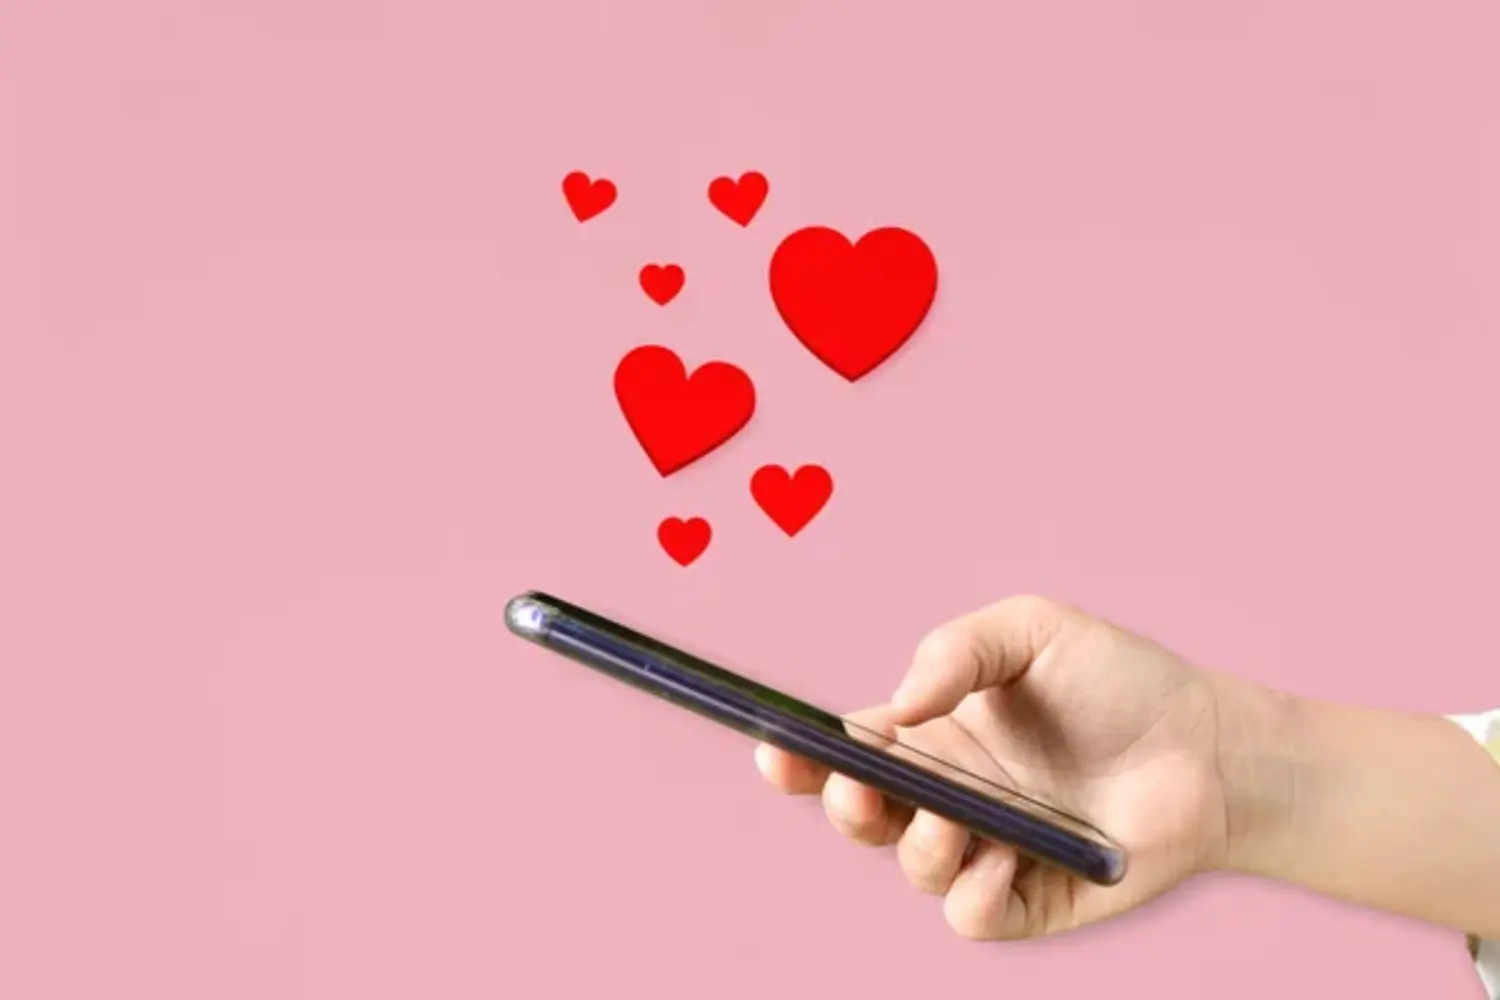 What Is Social Media E-Dating?